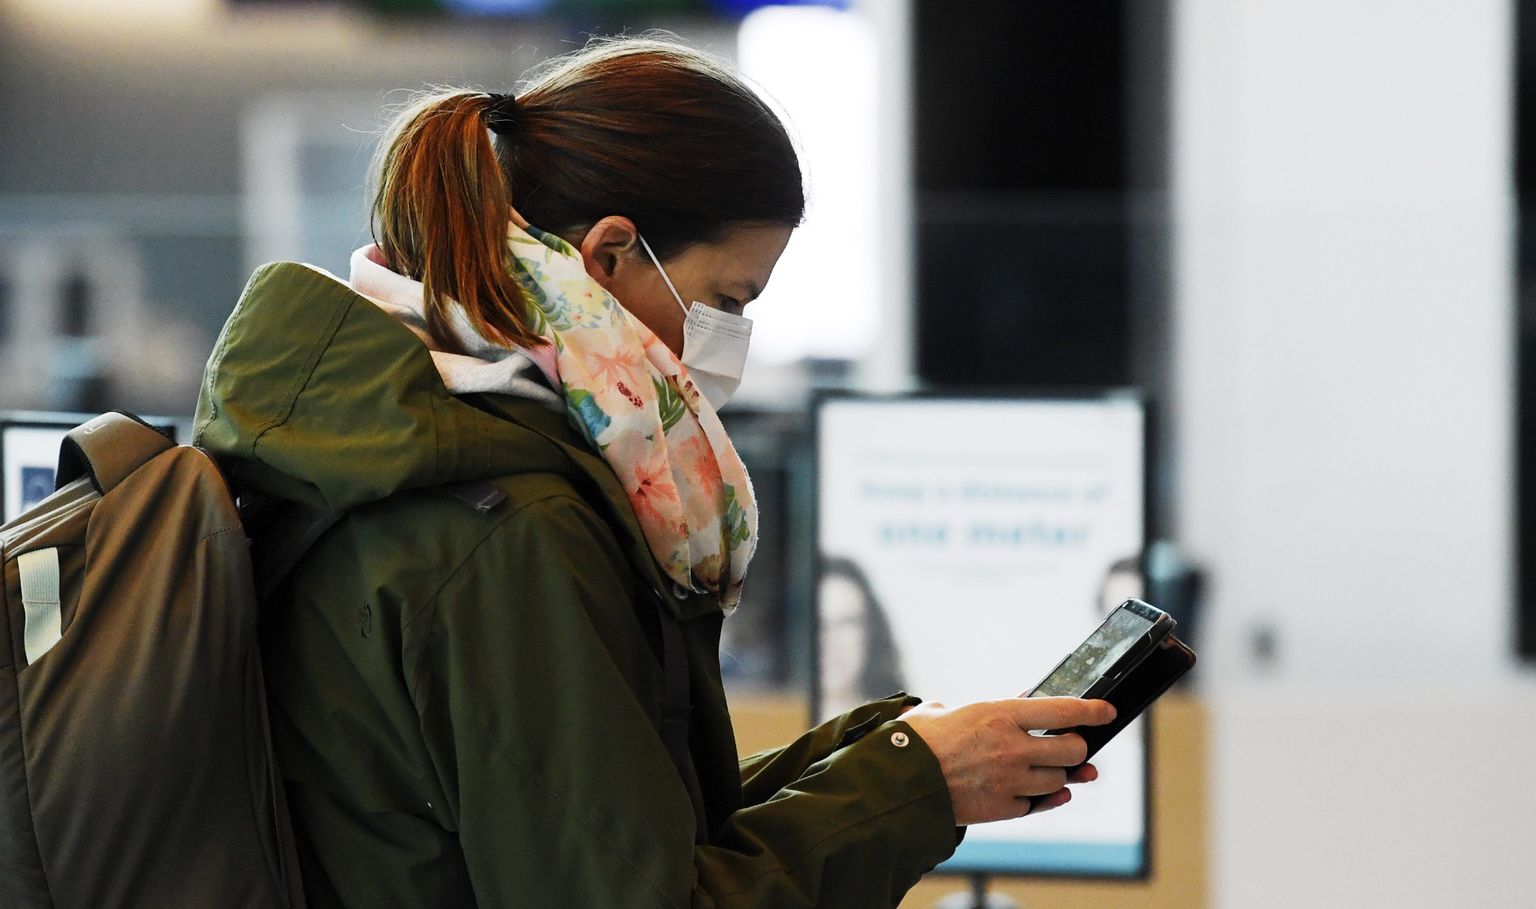 A passenger, wearing a face mask, looks at her phone at the Helsinki International Airport in Vantaa.